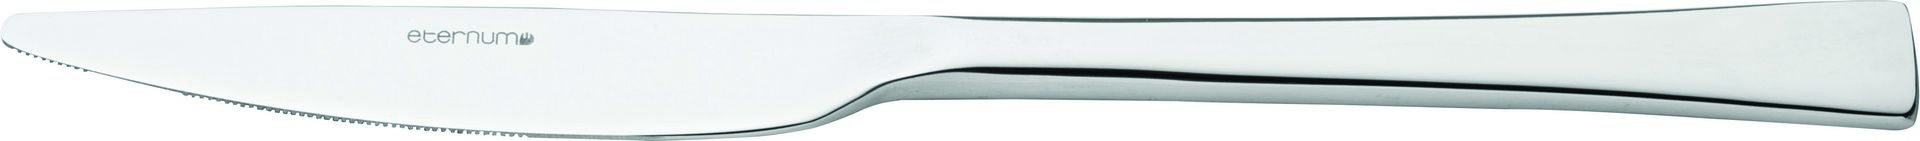 Curve Table Knife - F38012-000000-B01012 (Pack of 12)